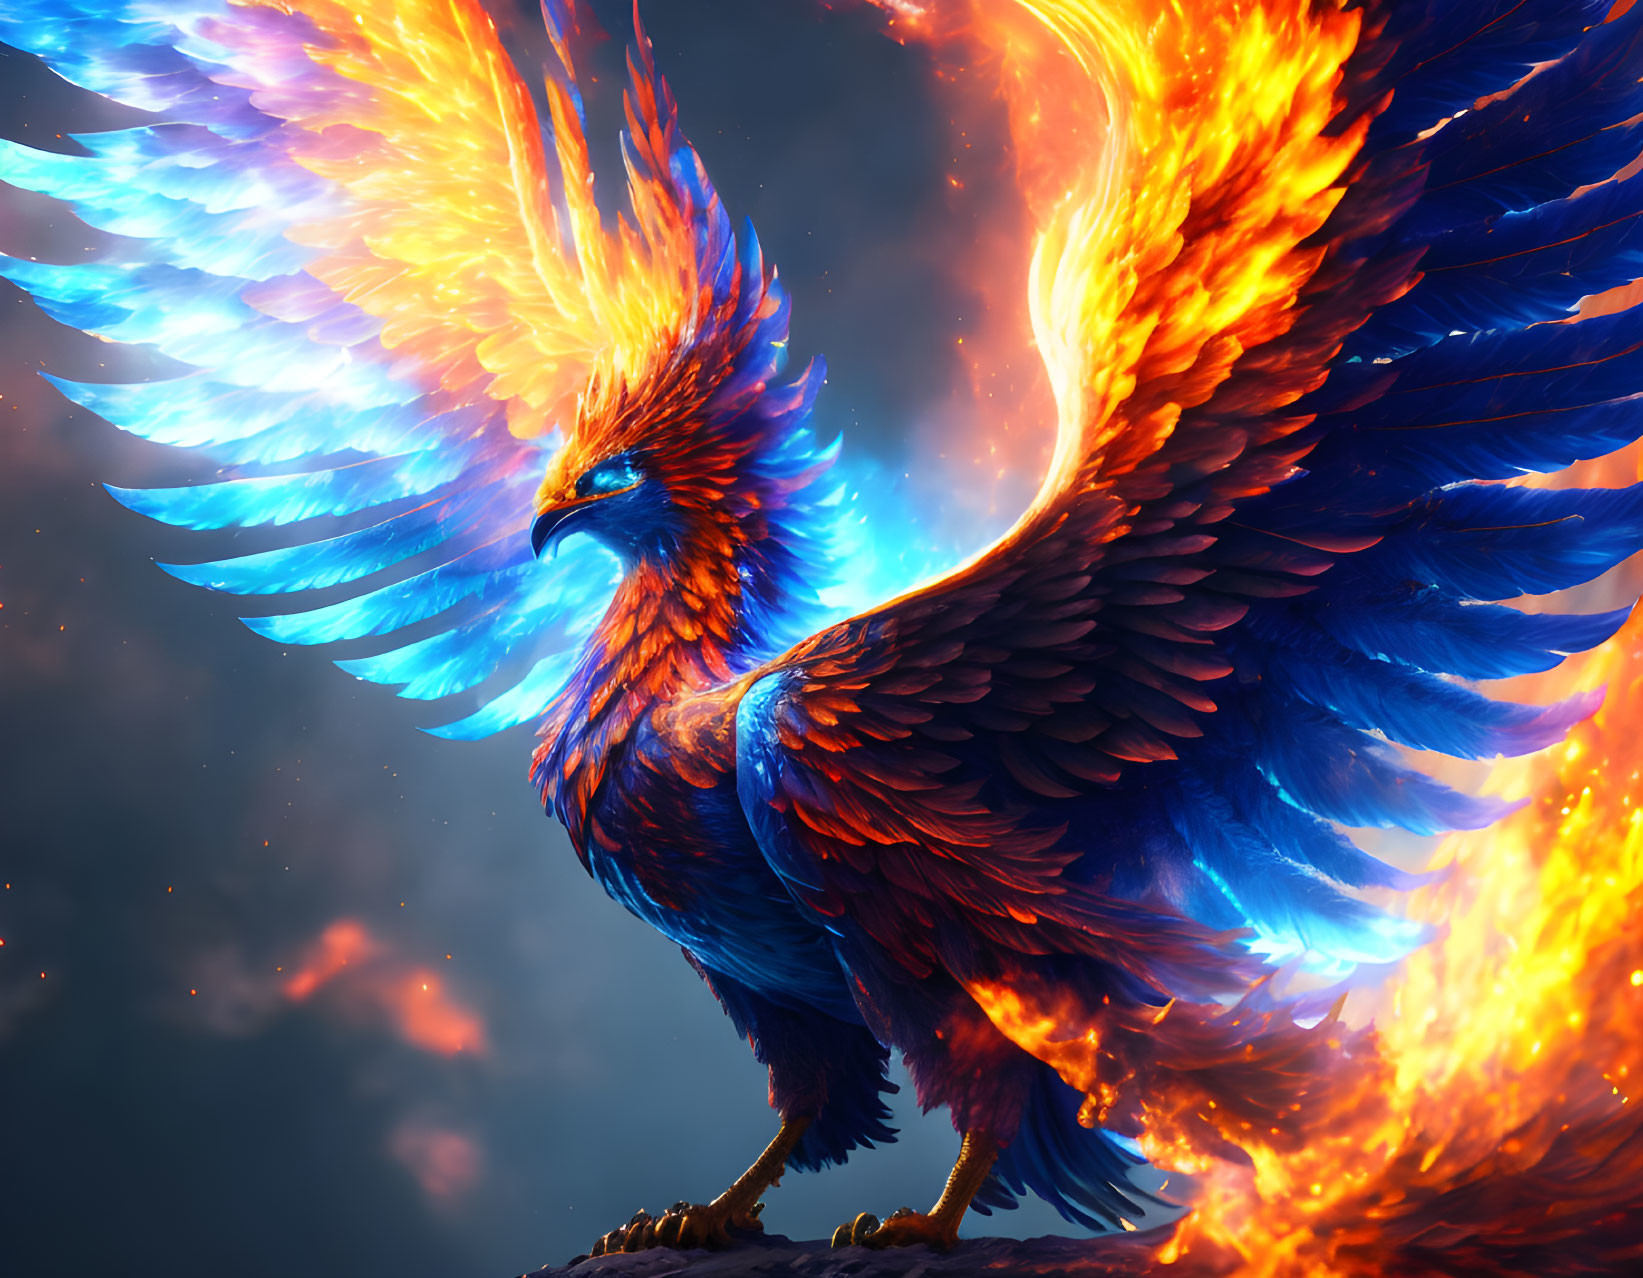 Colorful Phoenix Art in Fiery Plumage and Cloudy Sky